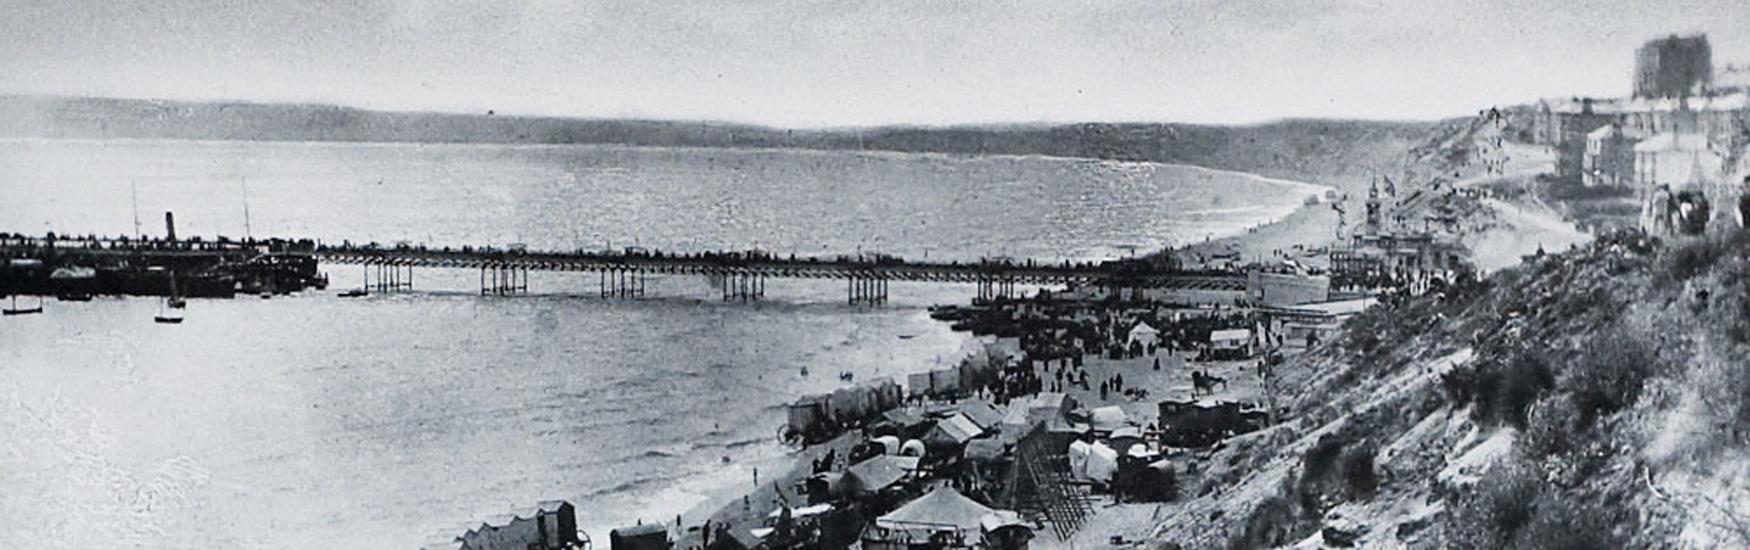 Bournemouth East Beach year 1890. Amusement Fair, bathing huts and horses on the beach